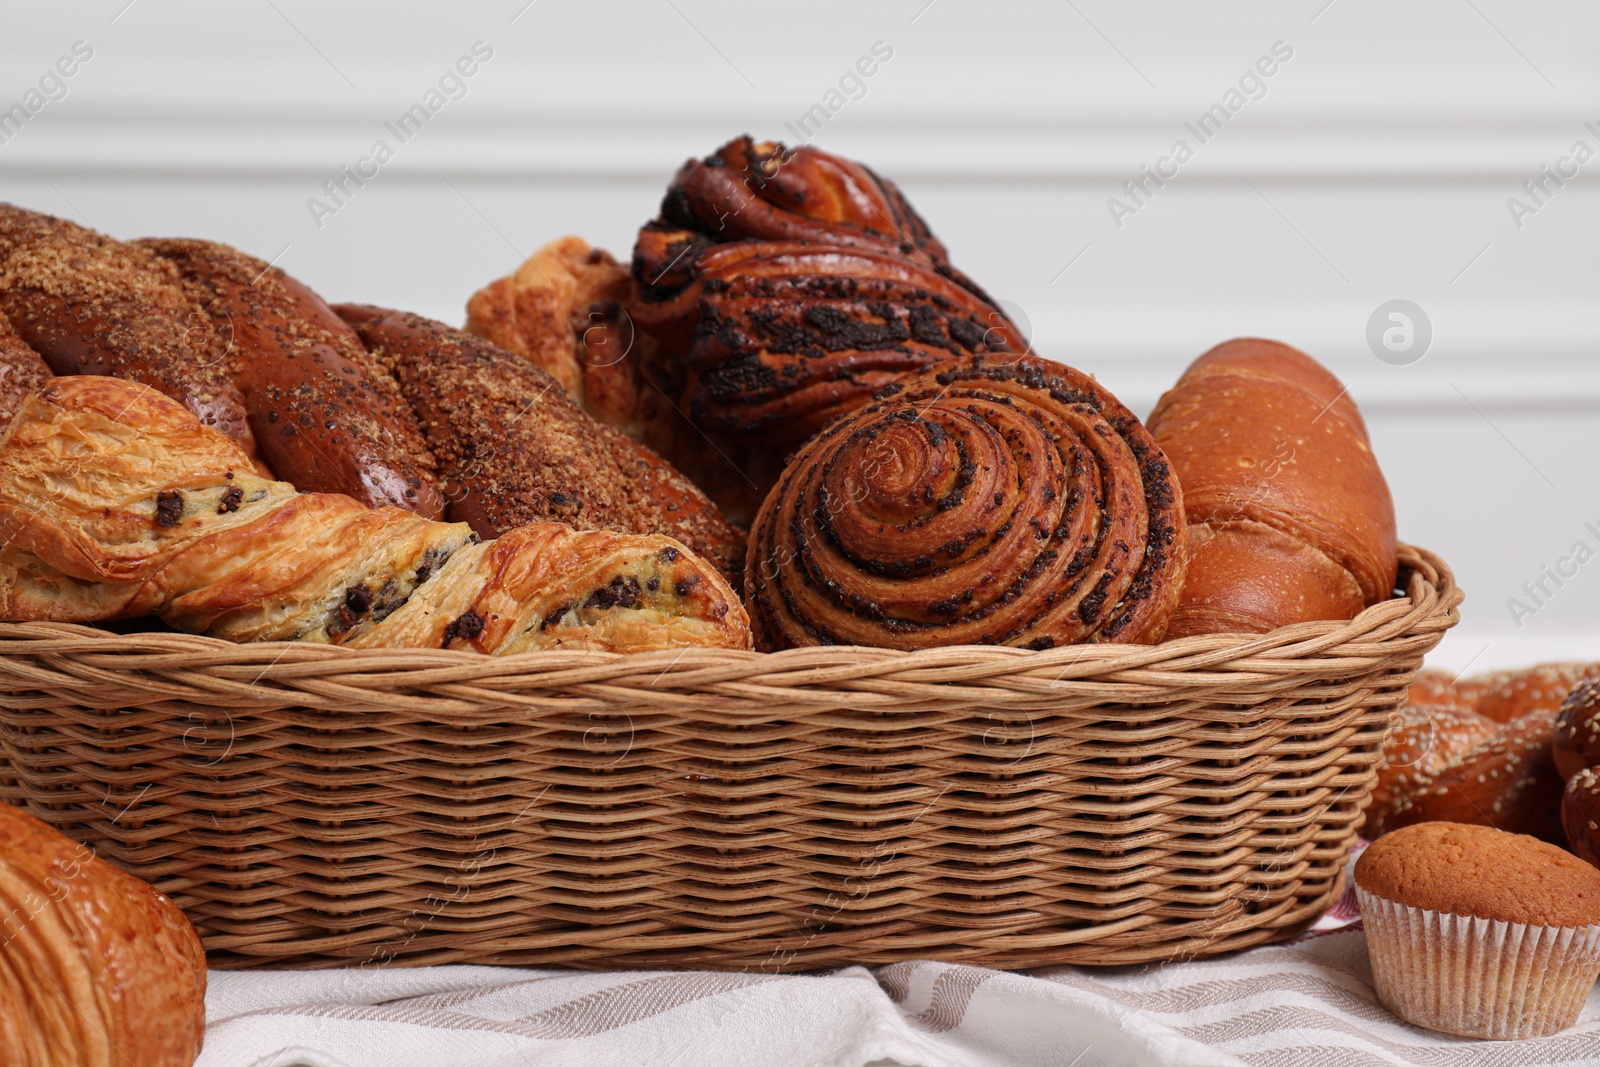 Photo of Wicker basket with different tasty freshly baked pastries on table, closeup